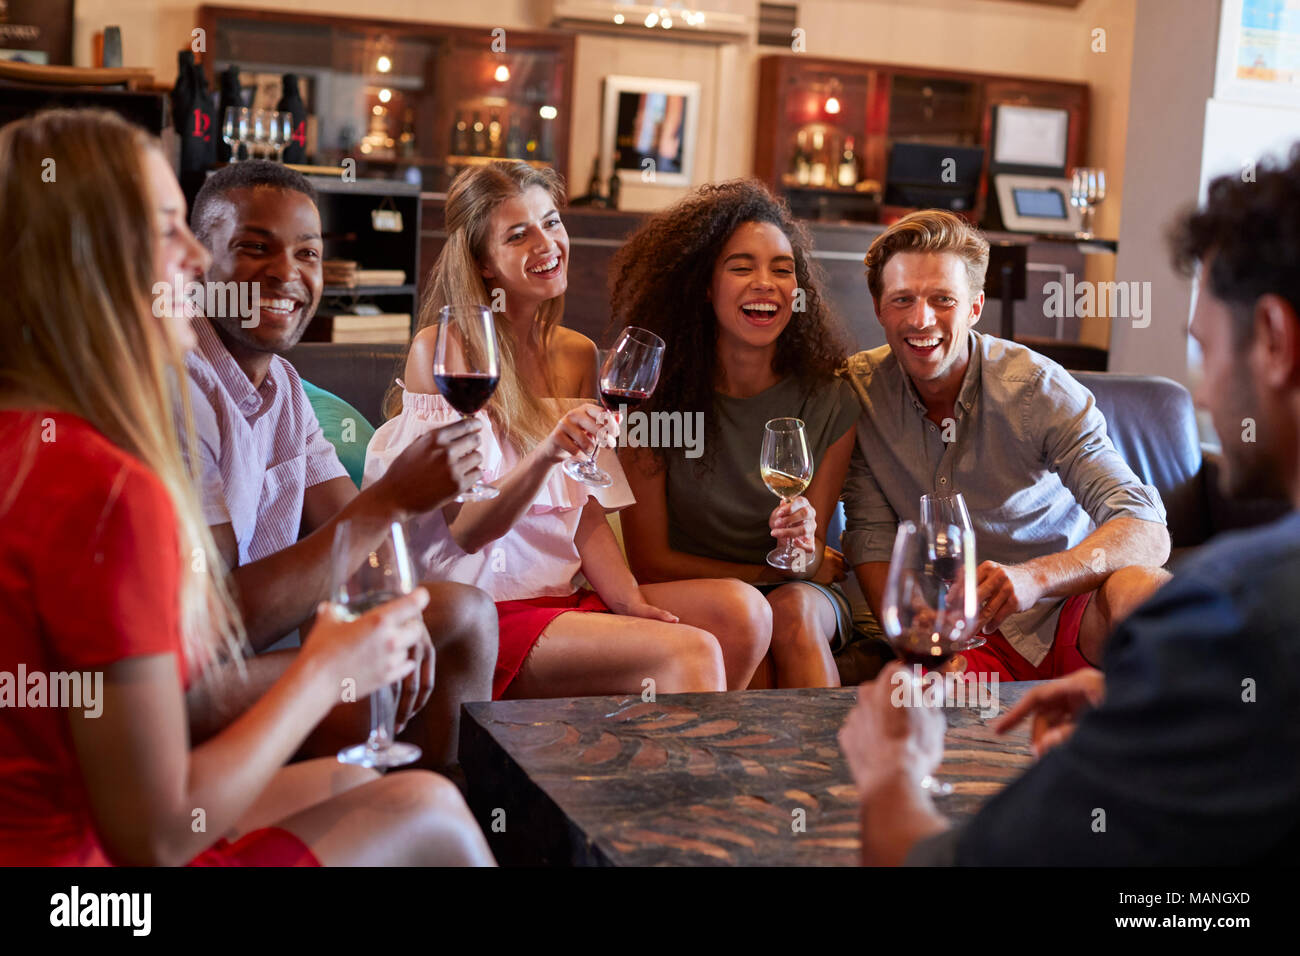 Six young adult friends drinking wine at a bar Stock Photo